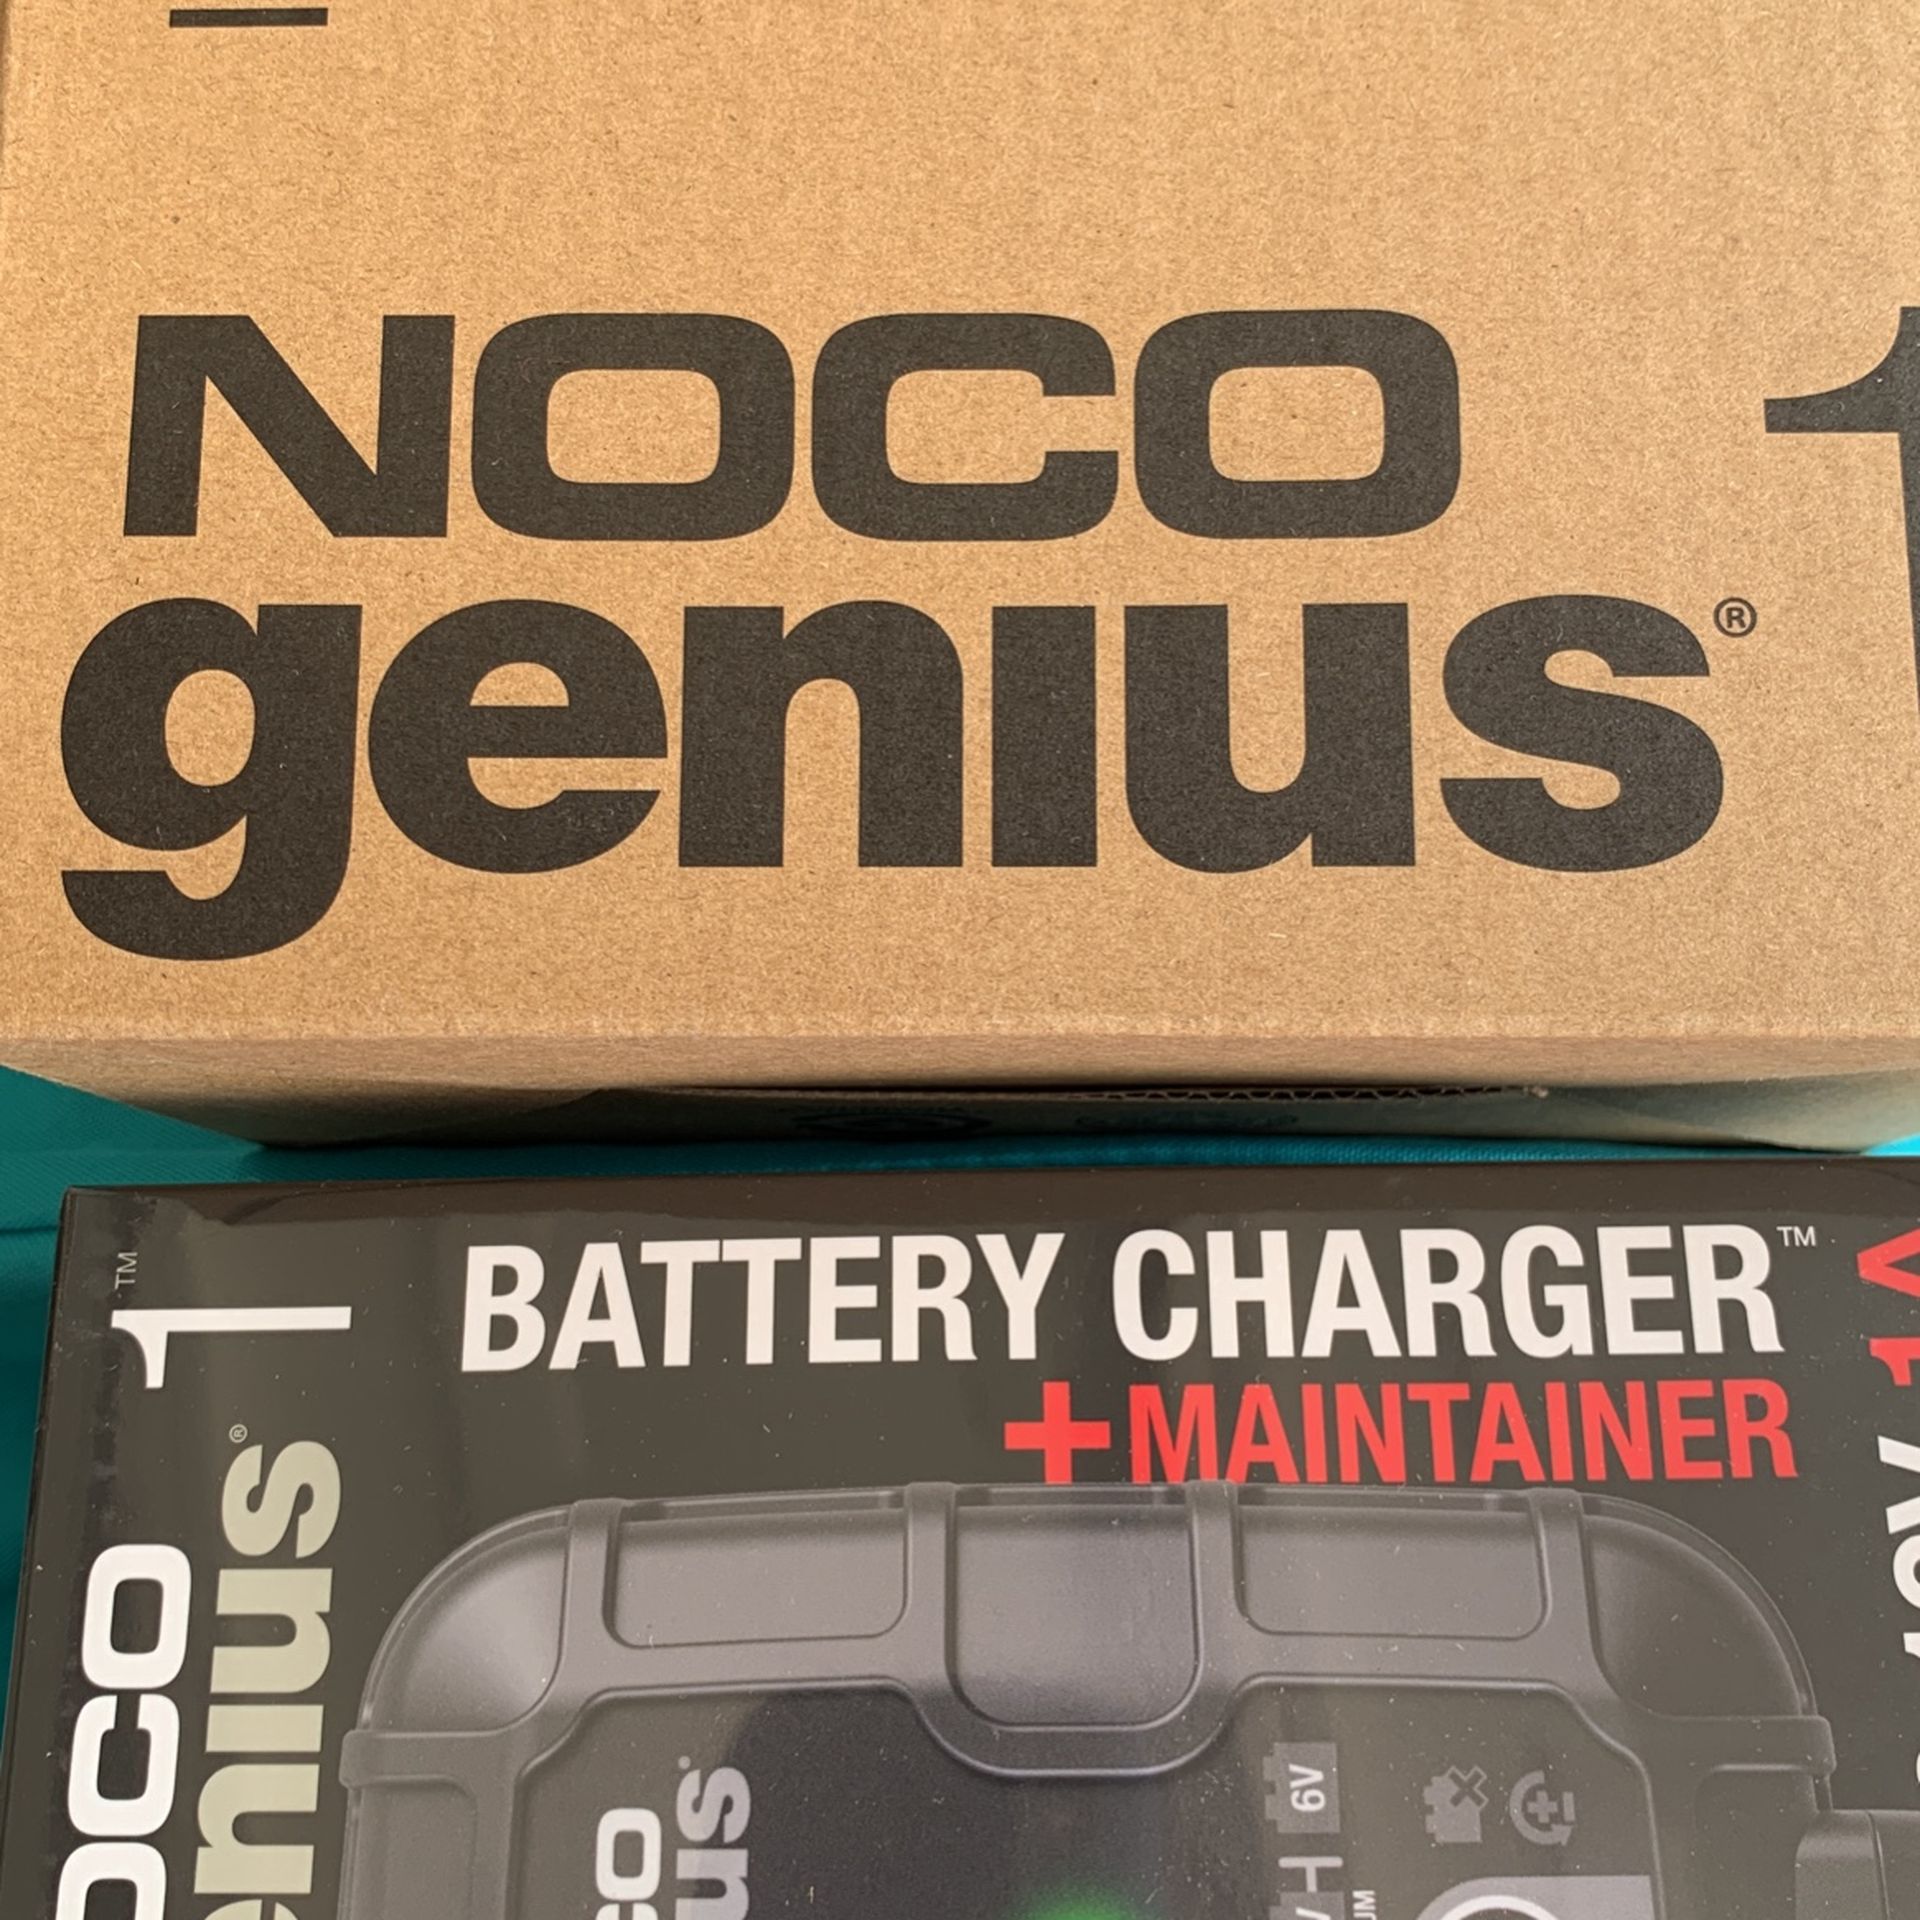 Noco Genius 1 Battery Charger & Maintainer